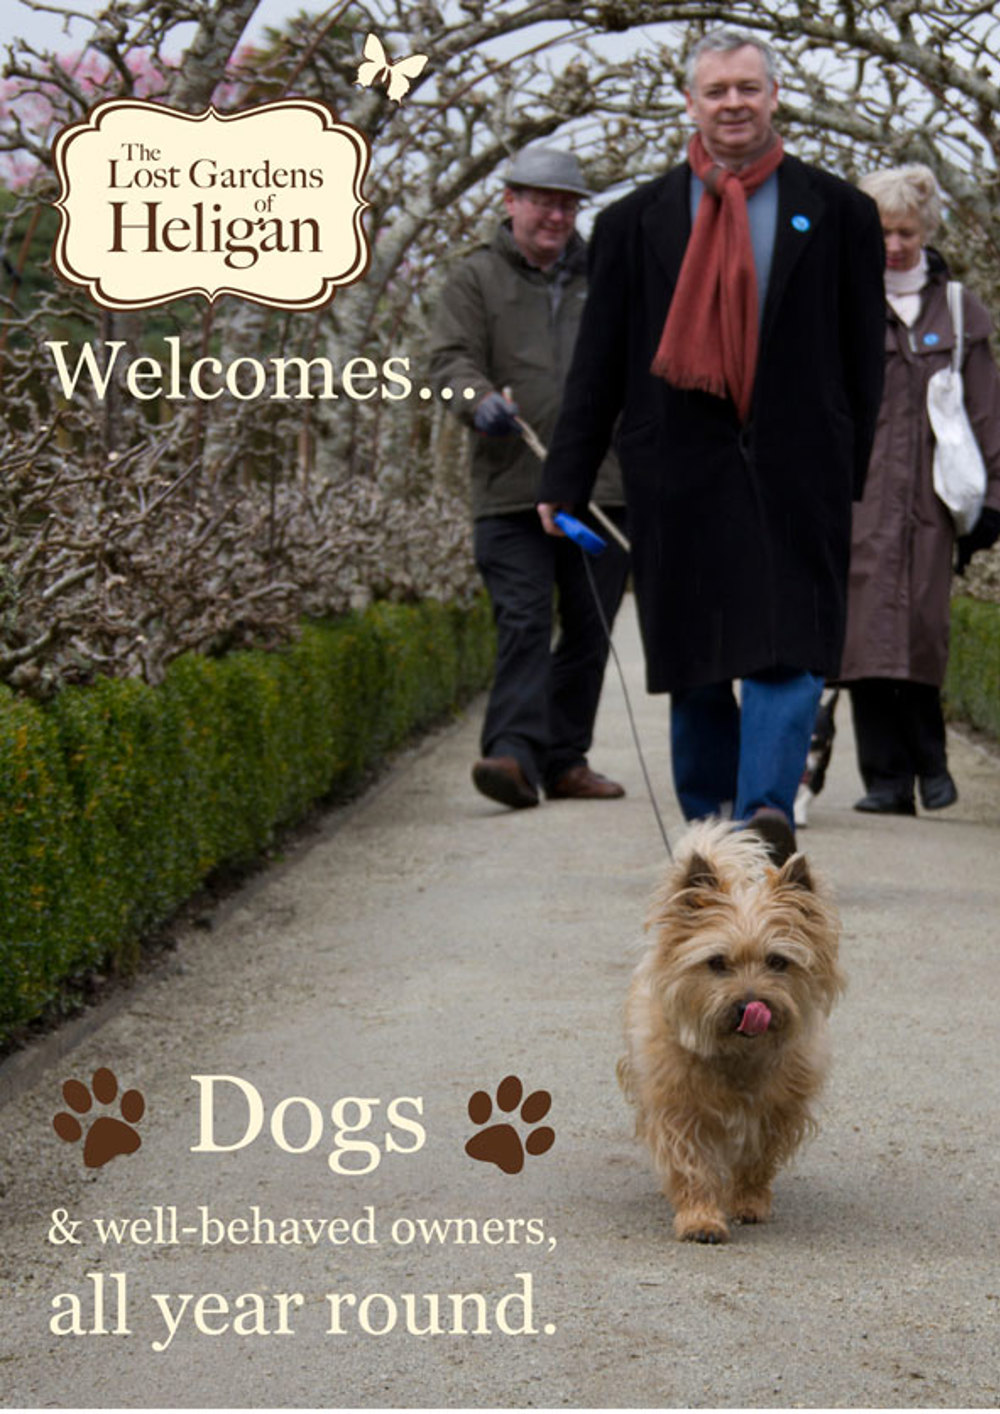 Heligan Dogs Poster 2013